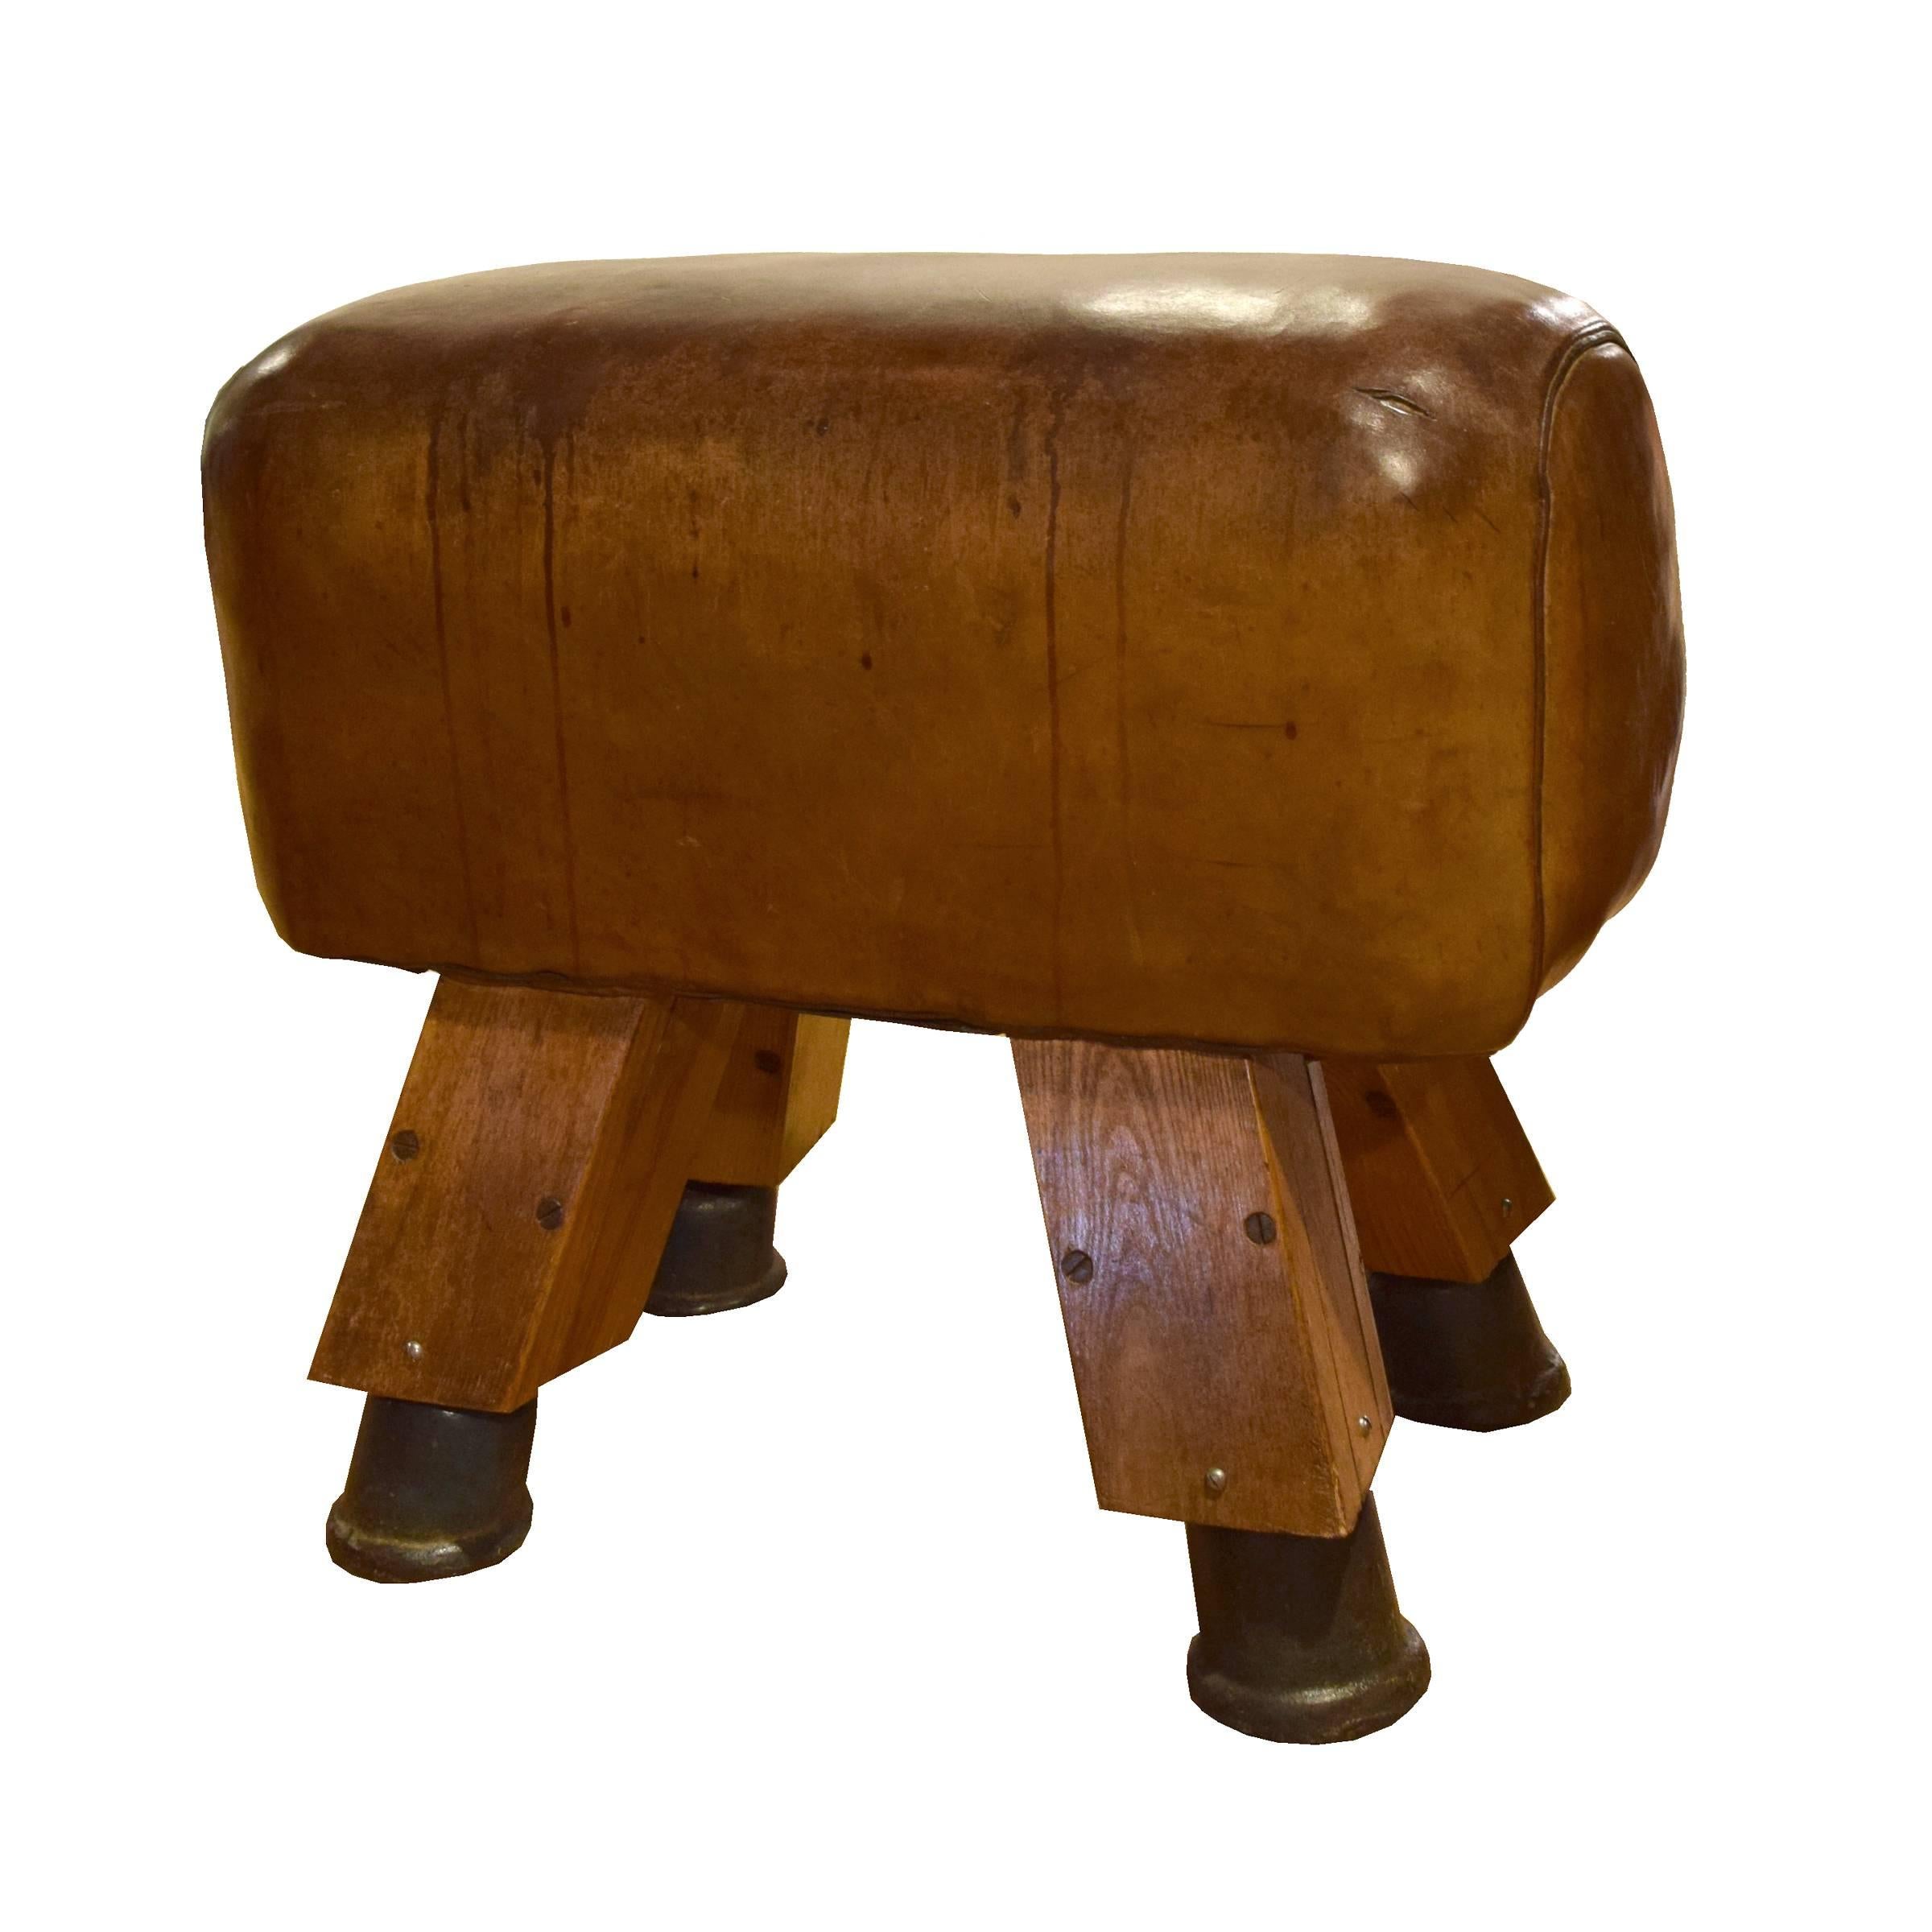 A fantastic early 20th century leather pommel horse bench with wooden legs, iron feet, and a great patina, from a gymnasium in the Czech Republic.